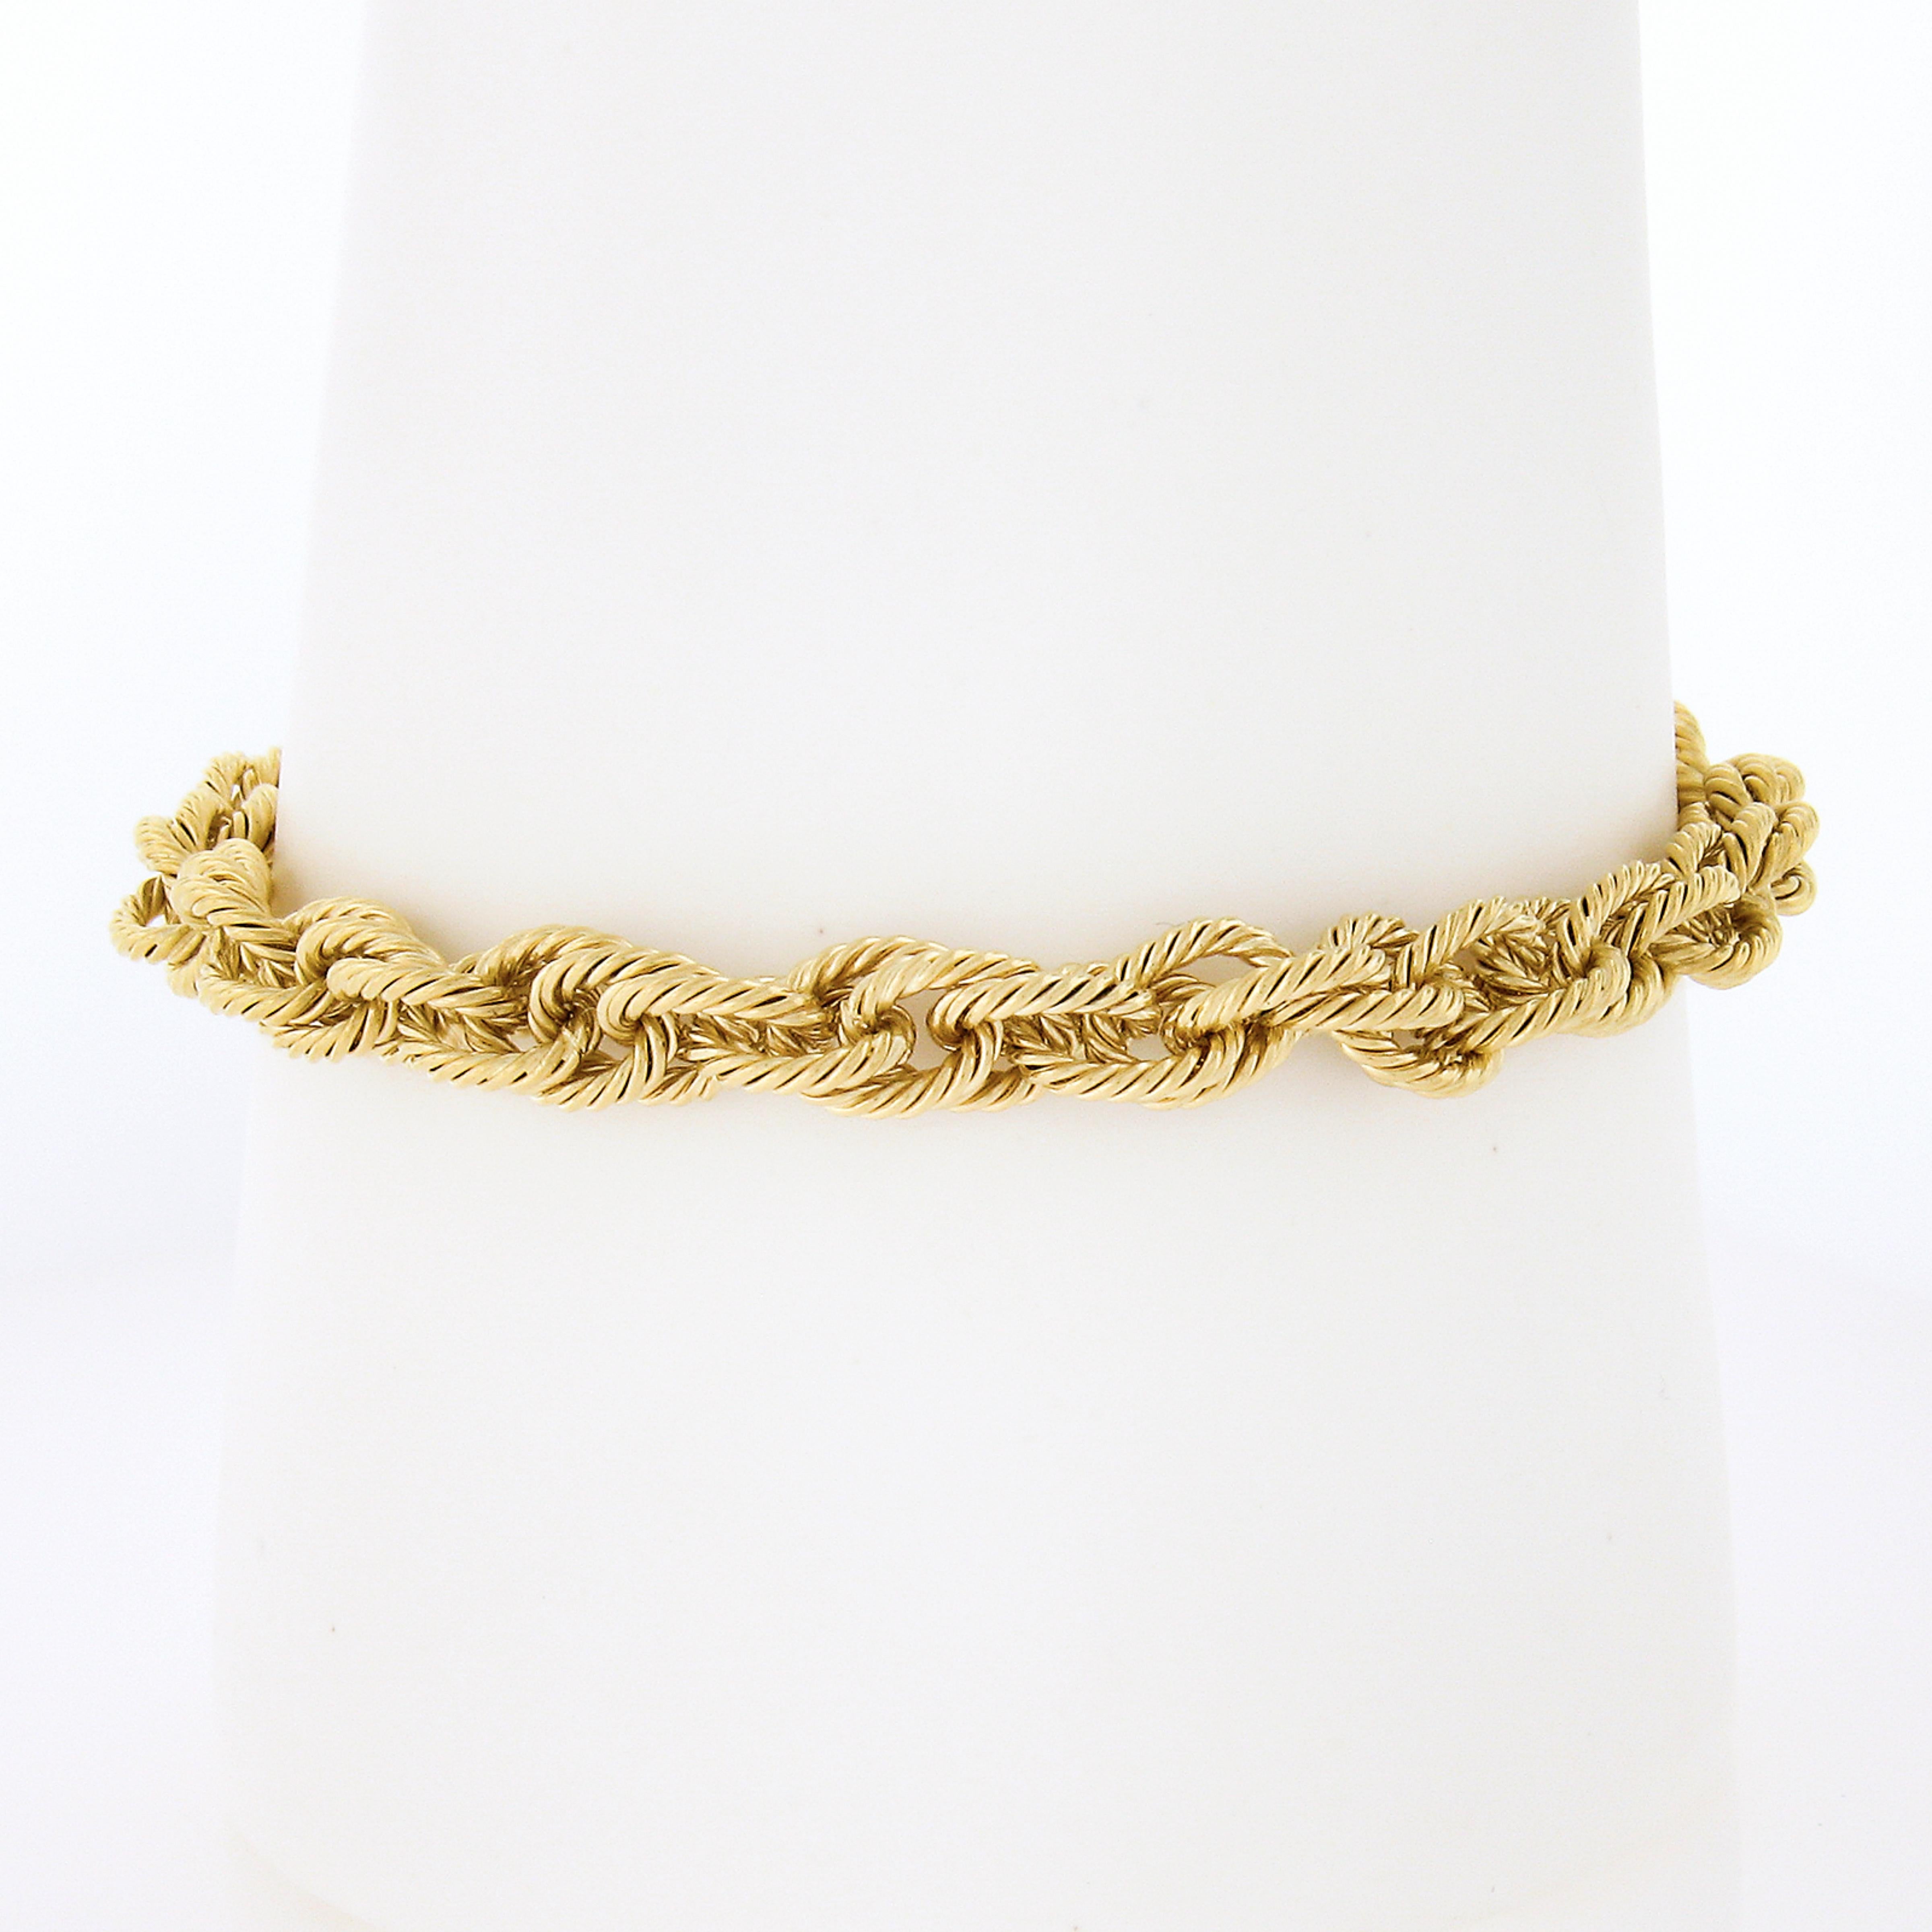 This gorgeous bracelet is crafted in solid 18k yellow gold and features woven textured twisted interlocking cable links. This bold bracelet features a large  oversized lobster claw clasp that ensures safe wear. Enjoy!

Material: Solid 18K Yellow